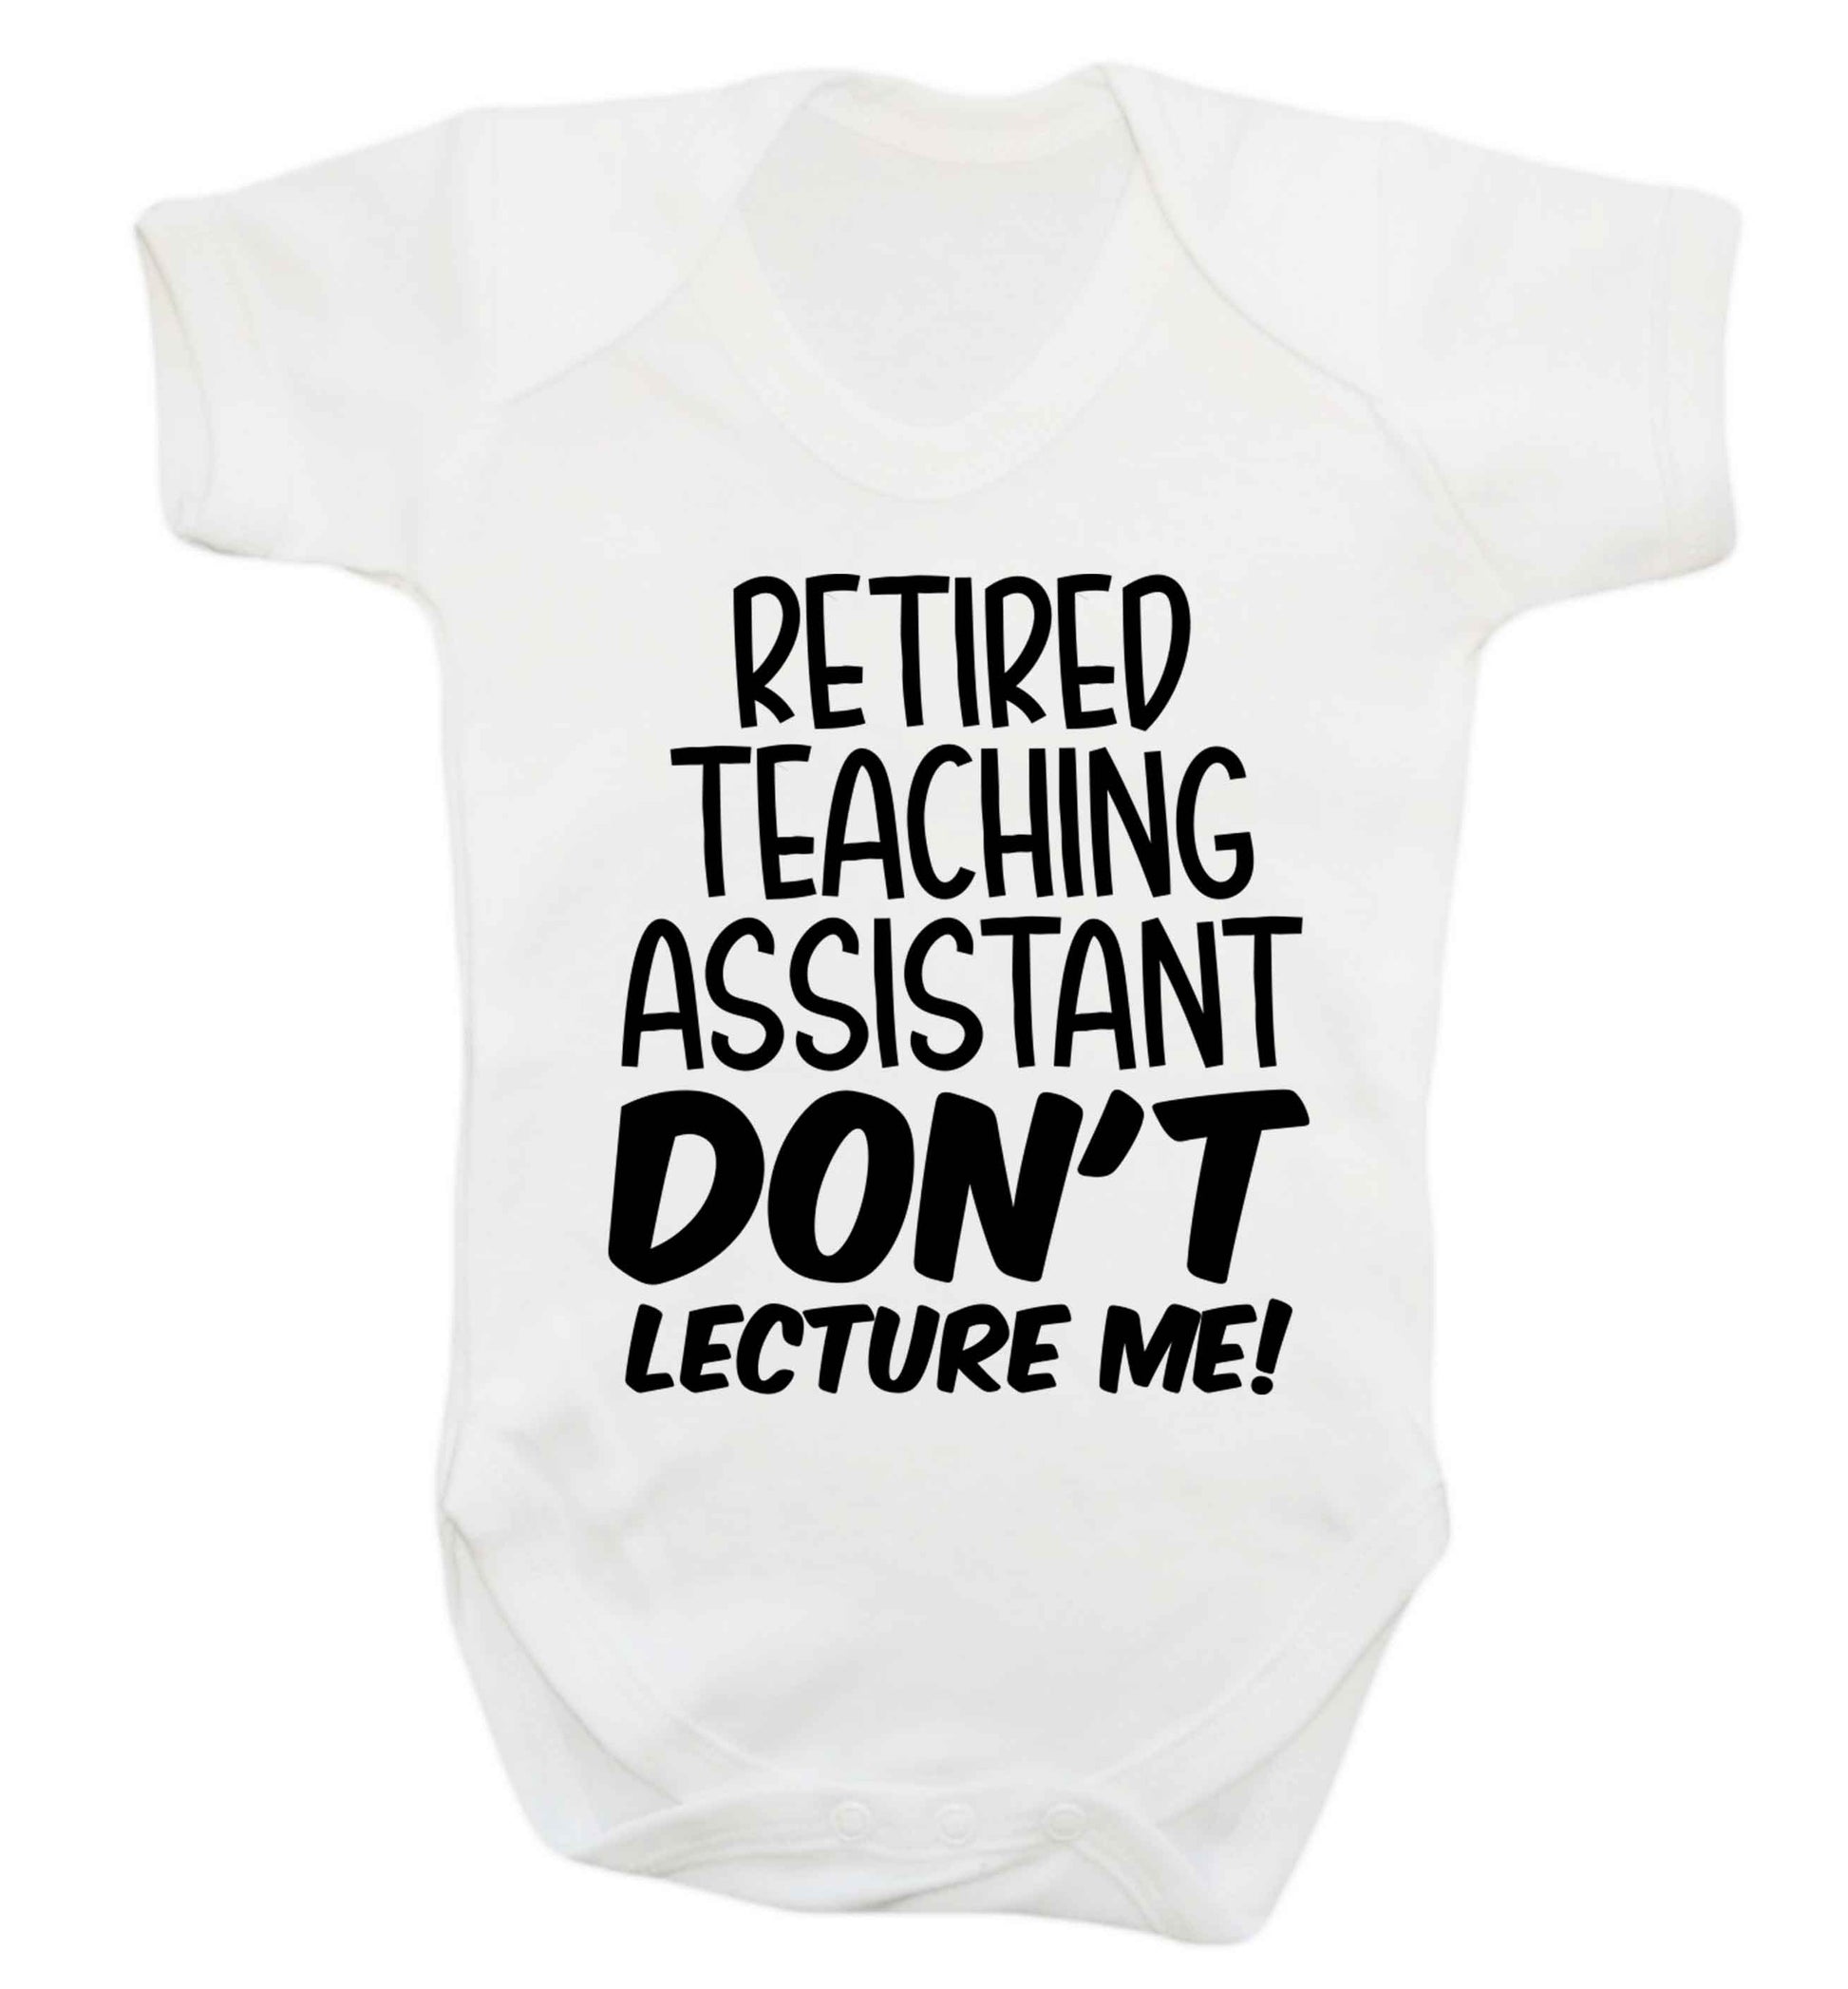 Retired teaching assistant don't lecture me Baby Vest white 18-24 months